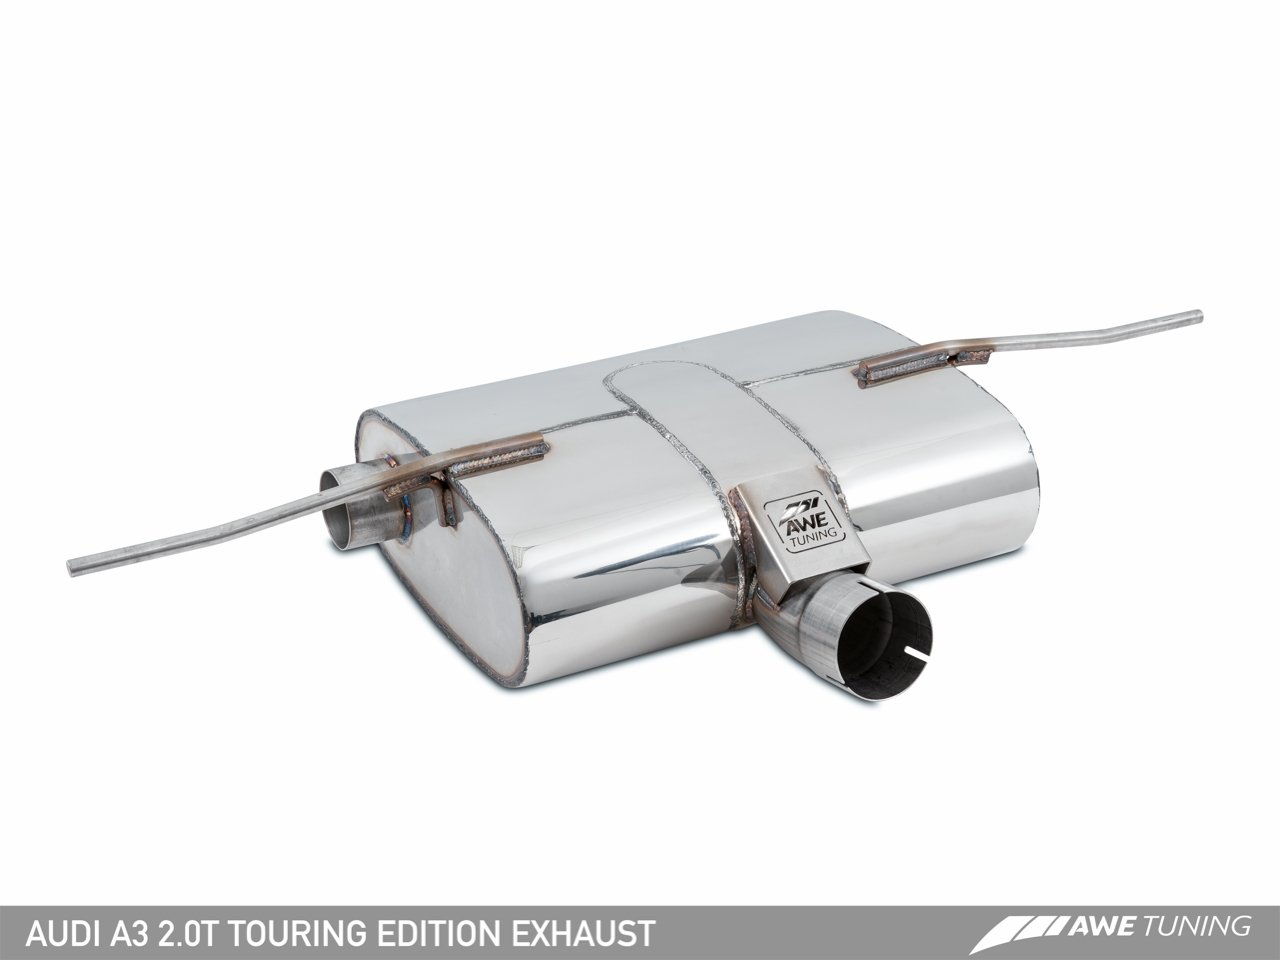 Touring Edition Exhaust for Audi 8V A3 2.0T